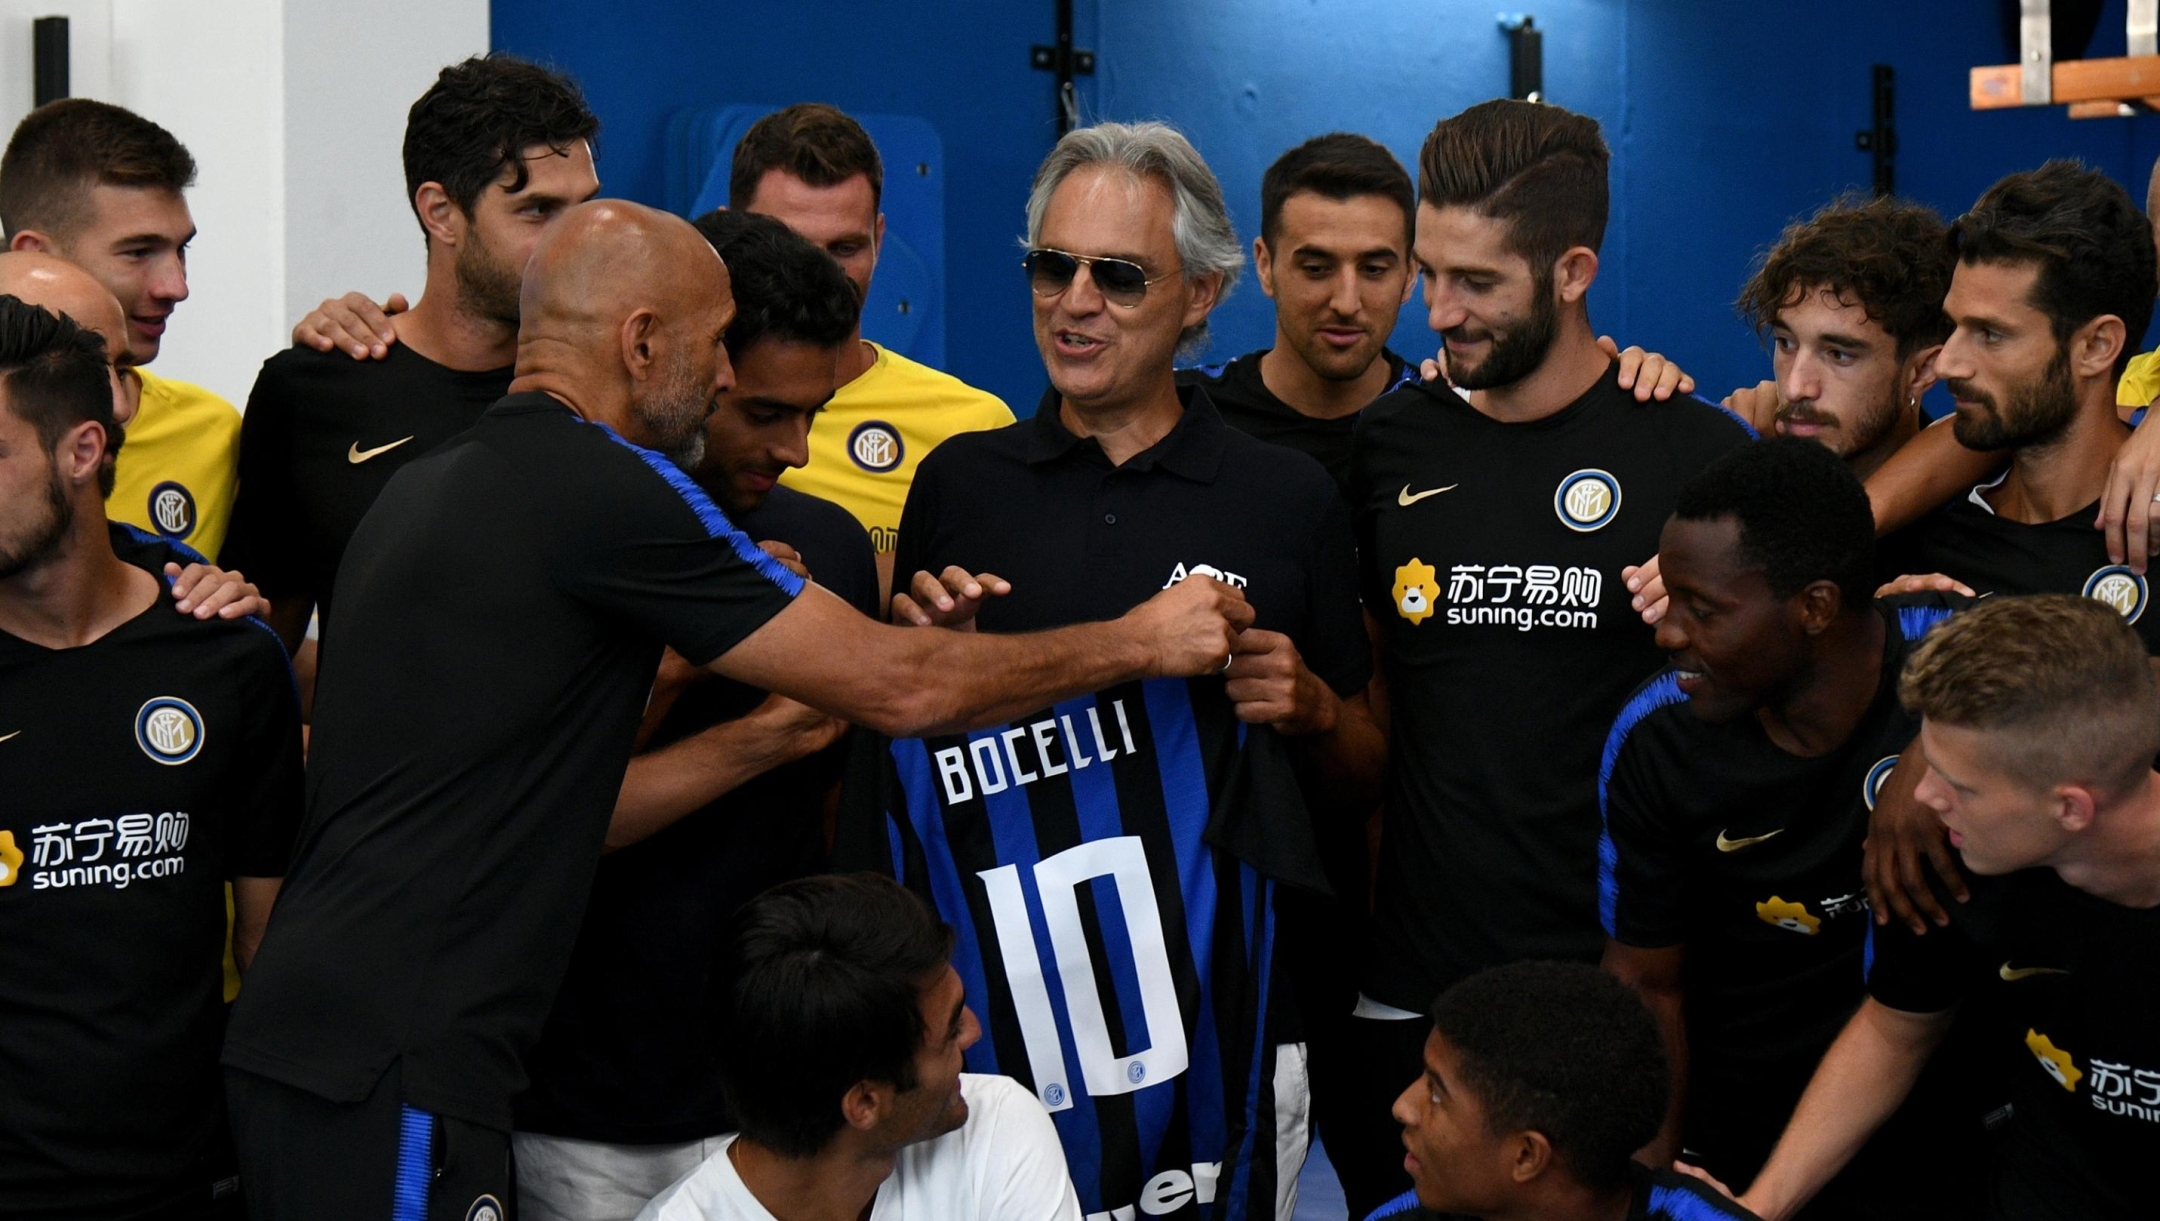 COMO, ITALY - AUGUST 16:  Singer Andrea Bocelli visits the club's training ground Suning Training Center in memory of Angelo Moratti at Appiano Gentile on August 16, 2018 in Como, Italy.  (Photo by Claudio Villa - Inter/Inter via Getty Images)